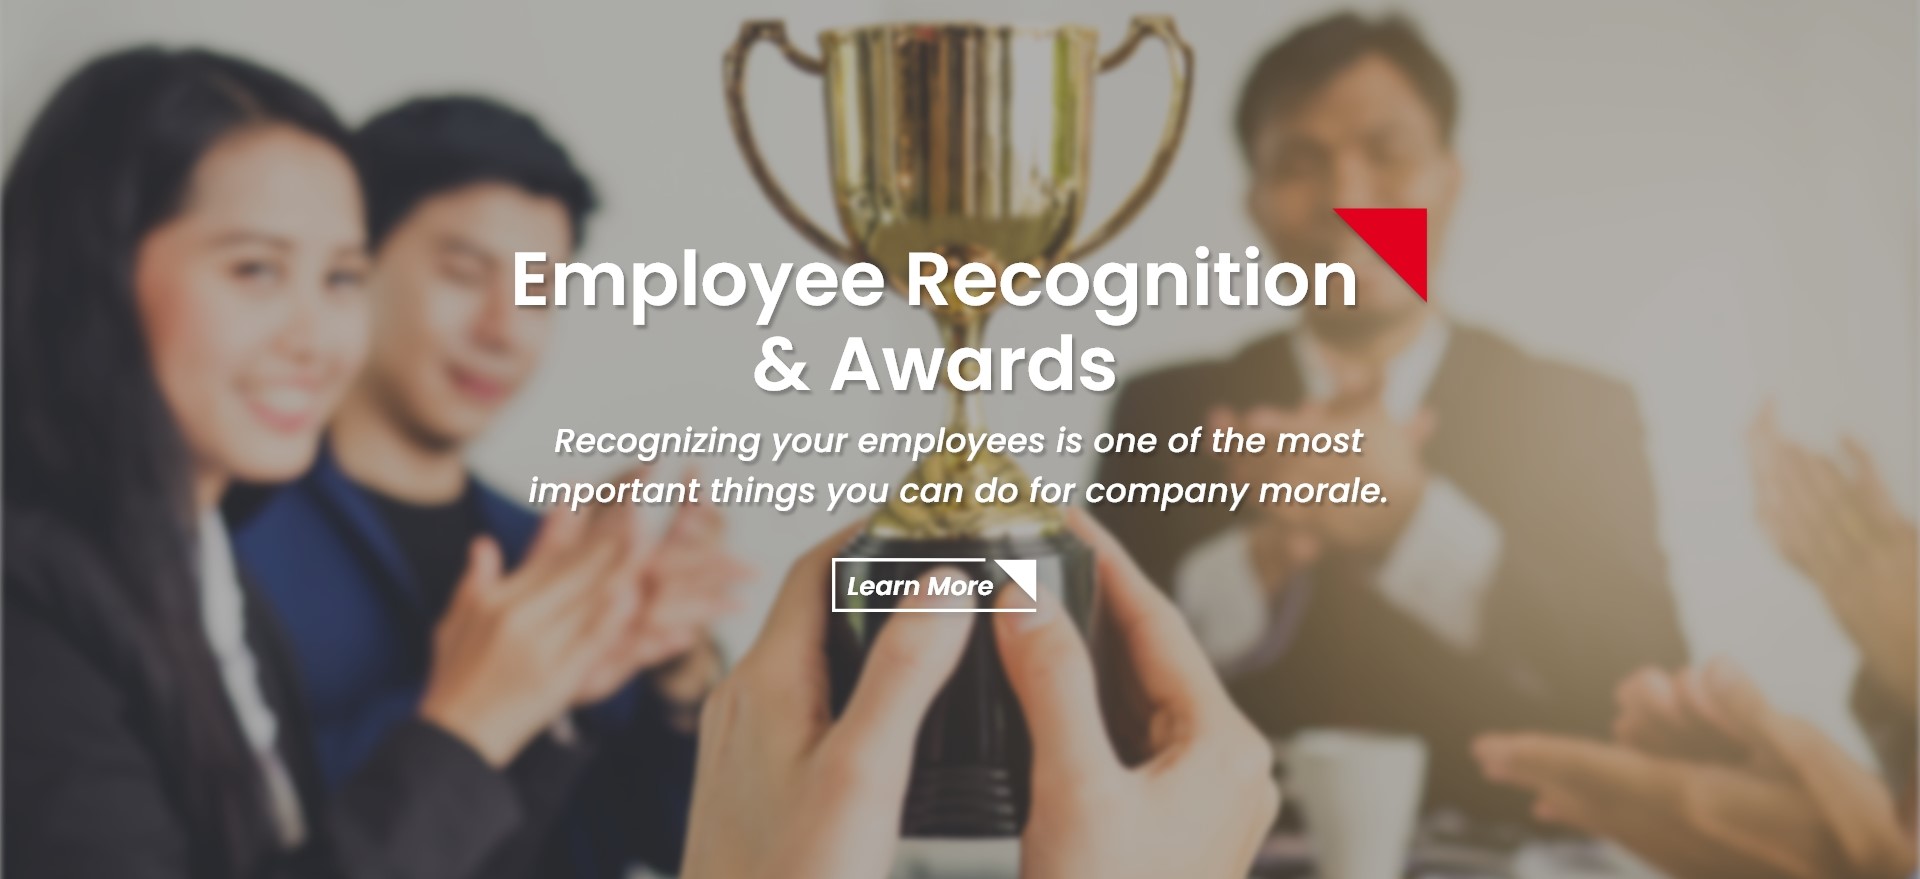 Employee Recognition
                  & Awards